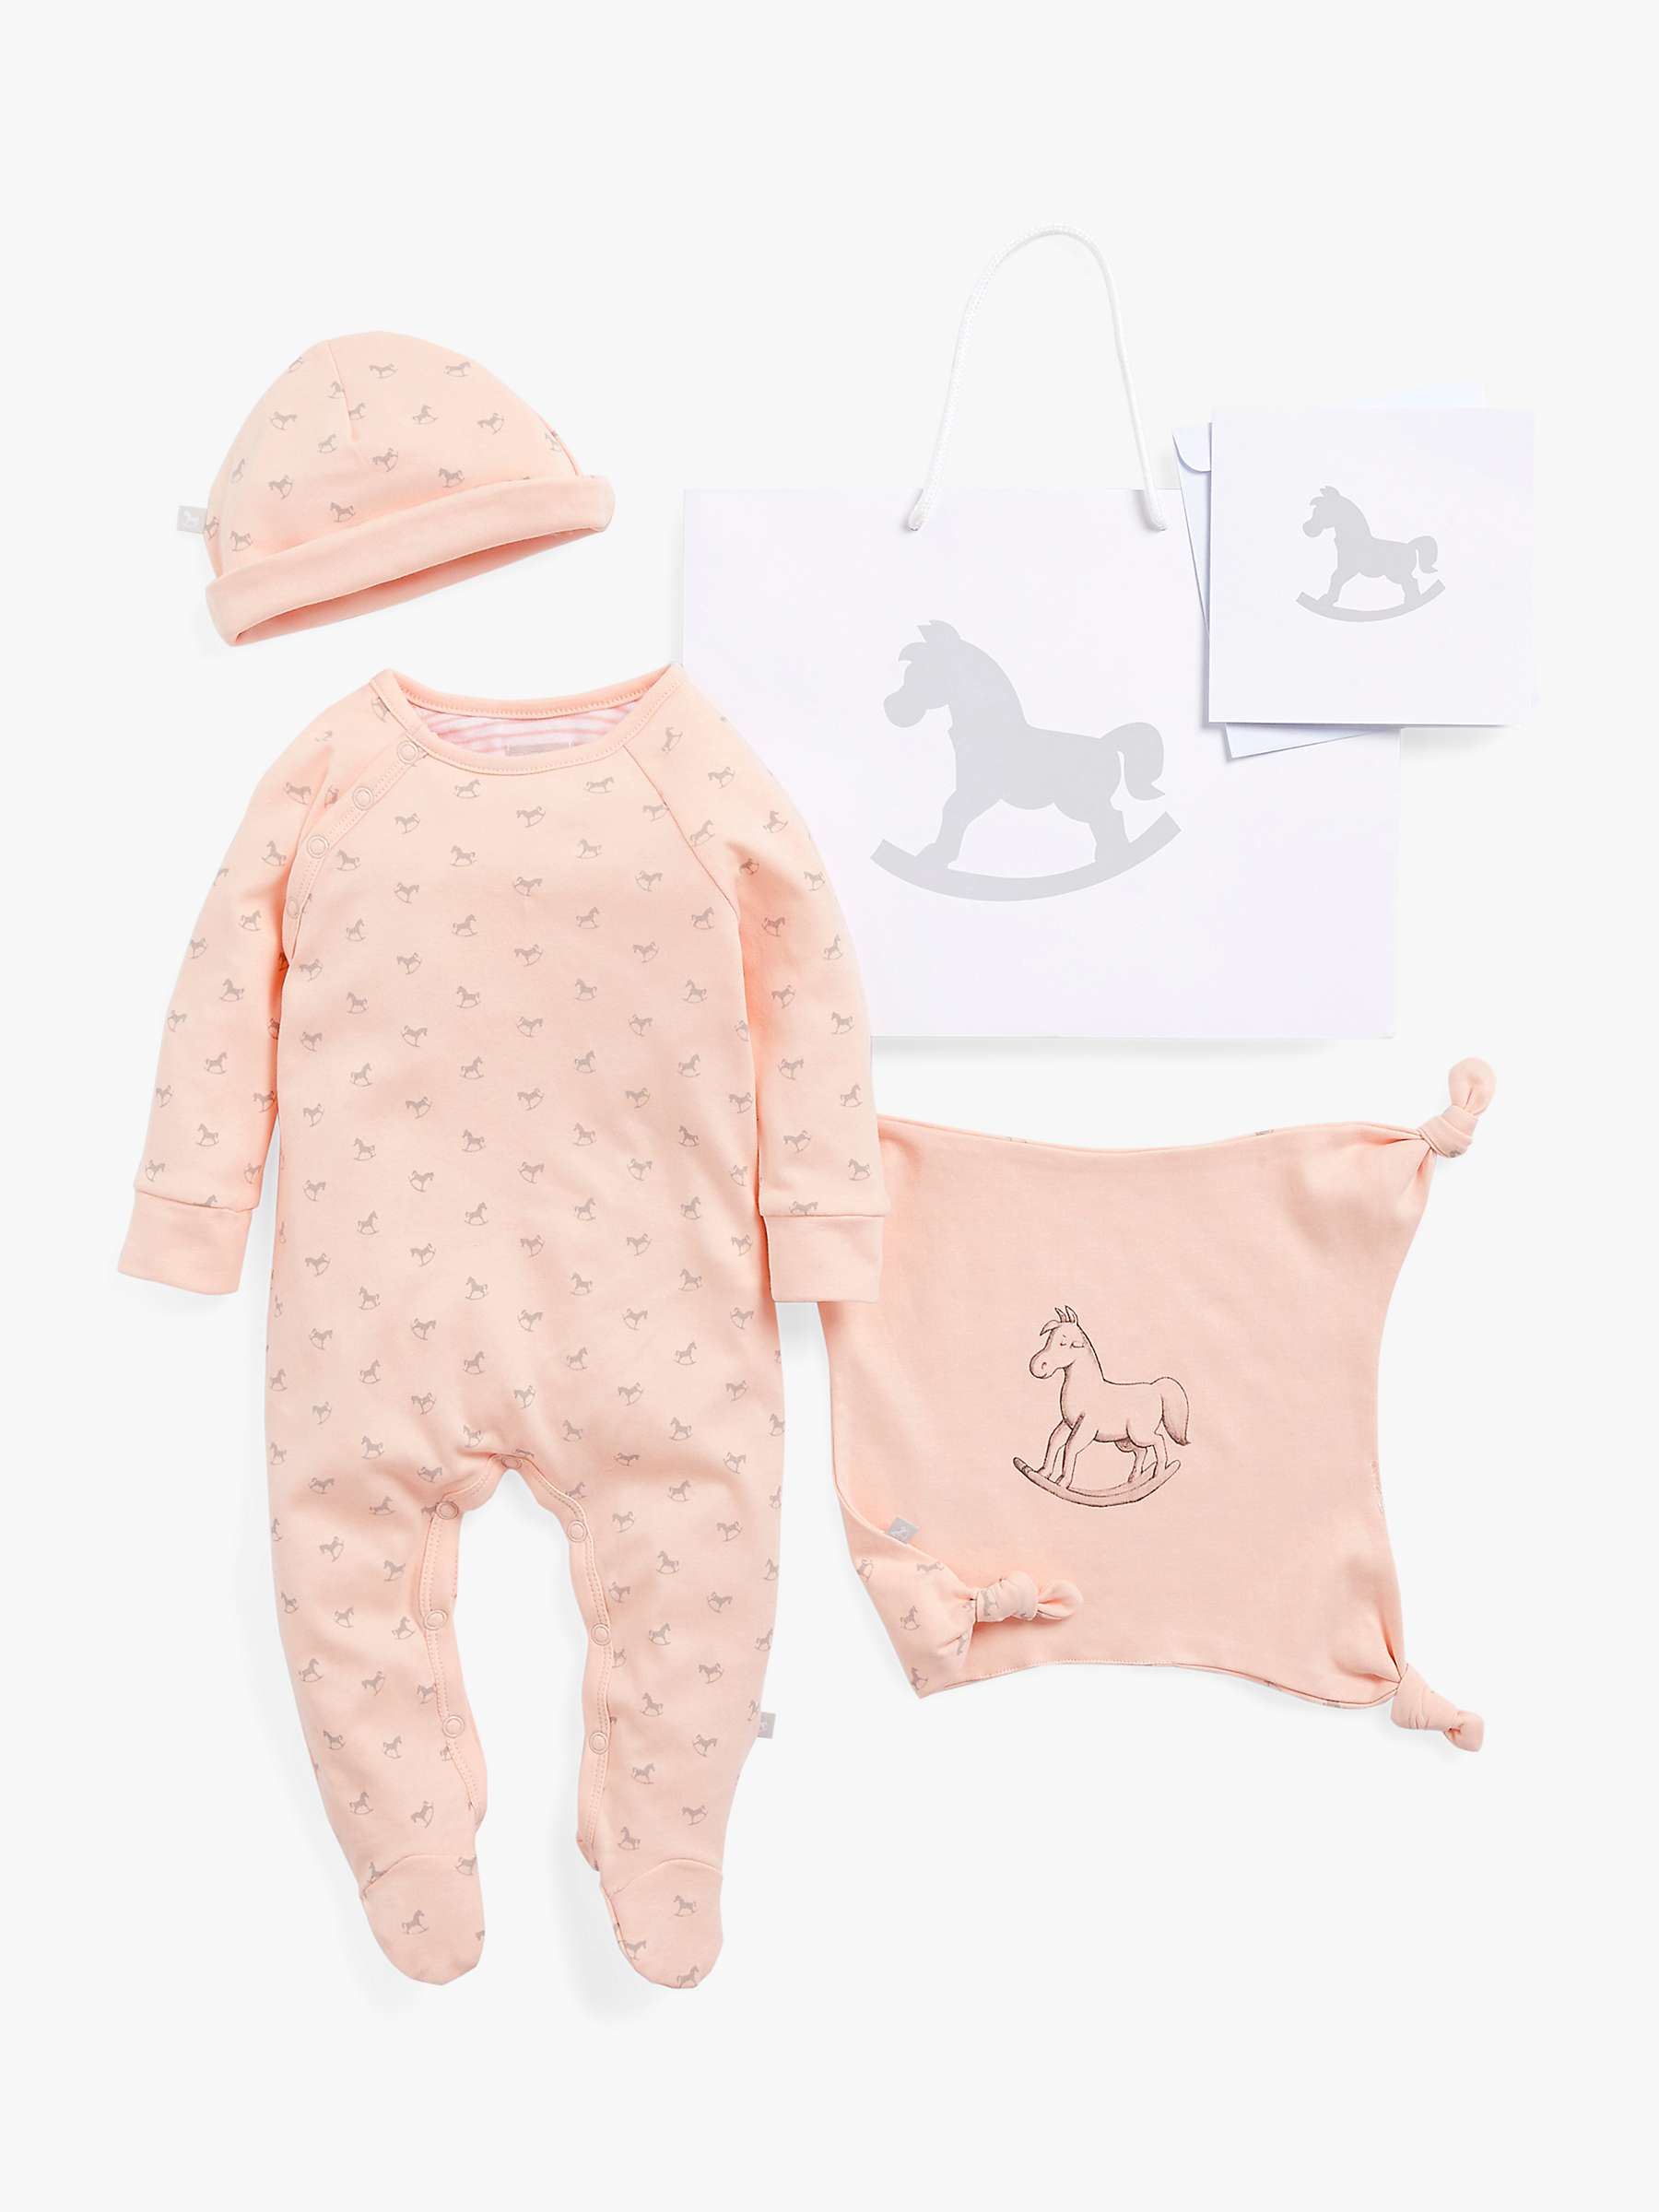 Buy The Little Tailor Baby Three Piece Set Online at johnlewis.com